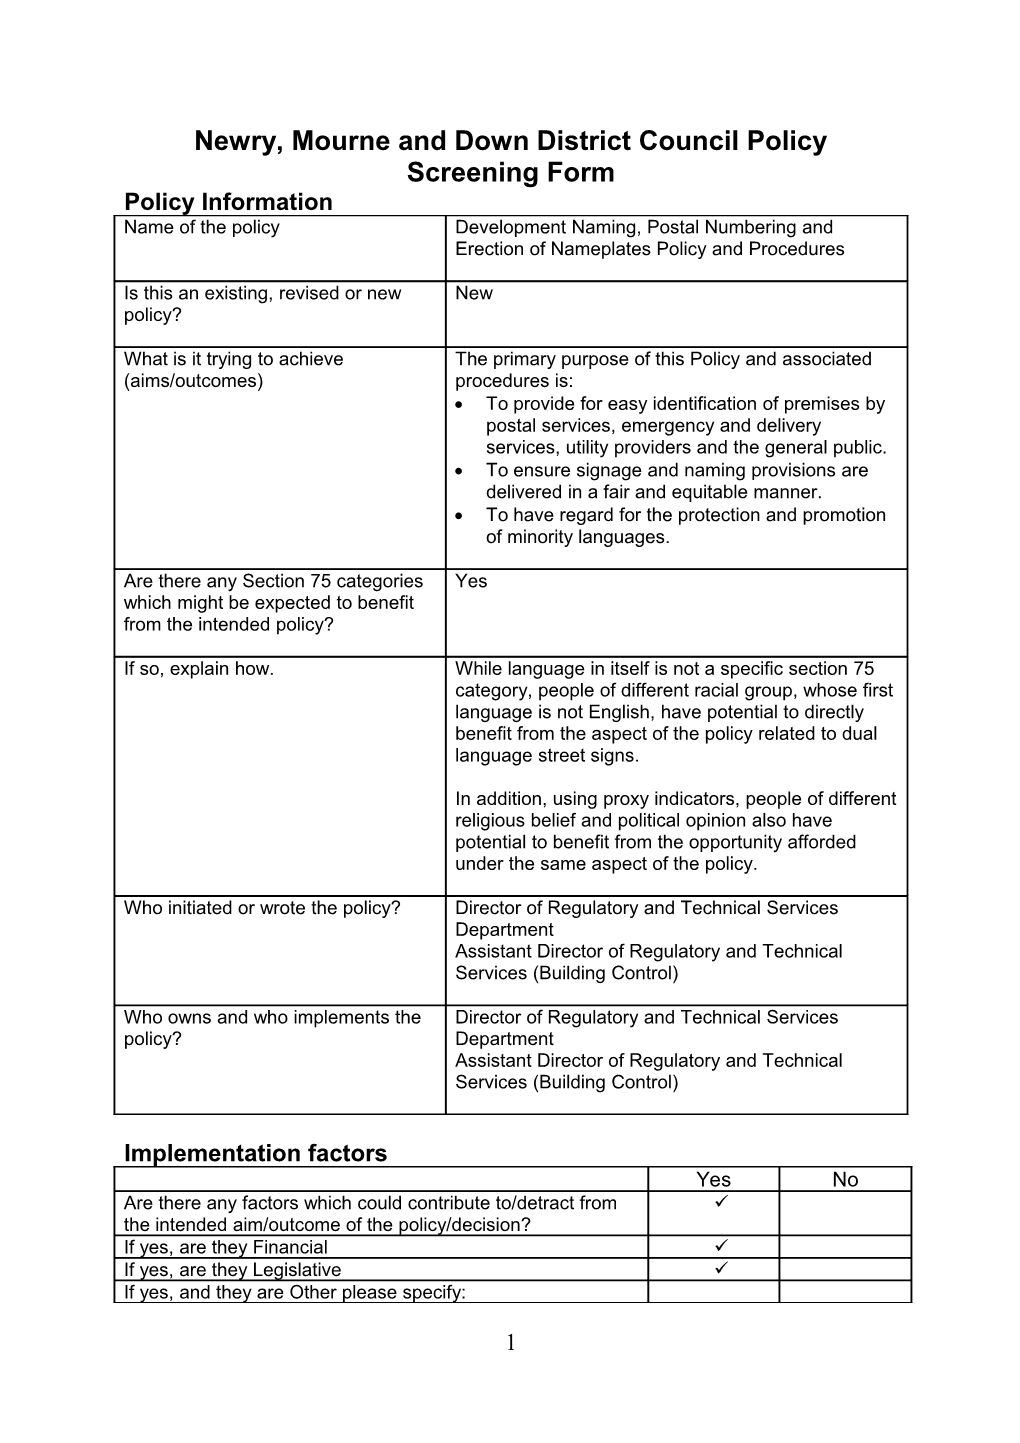 Newry, Mourne and Down District Council Policy Screening Form s1